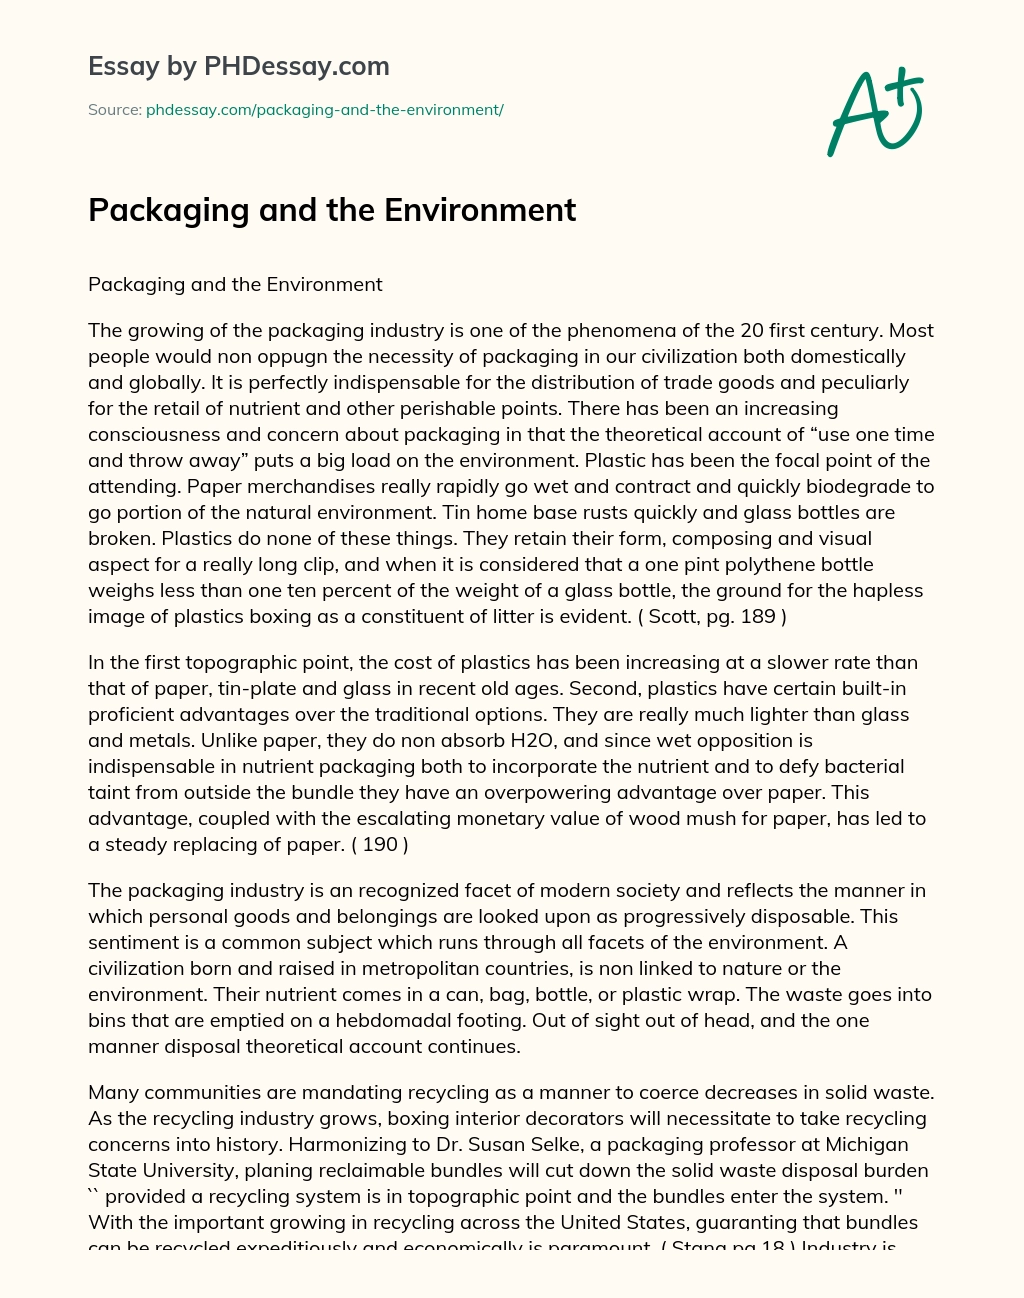 Packaging and the Environment essay